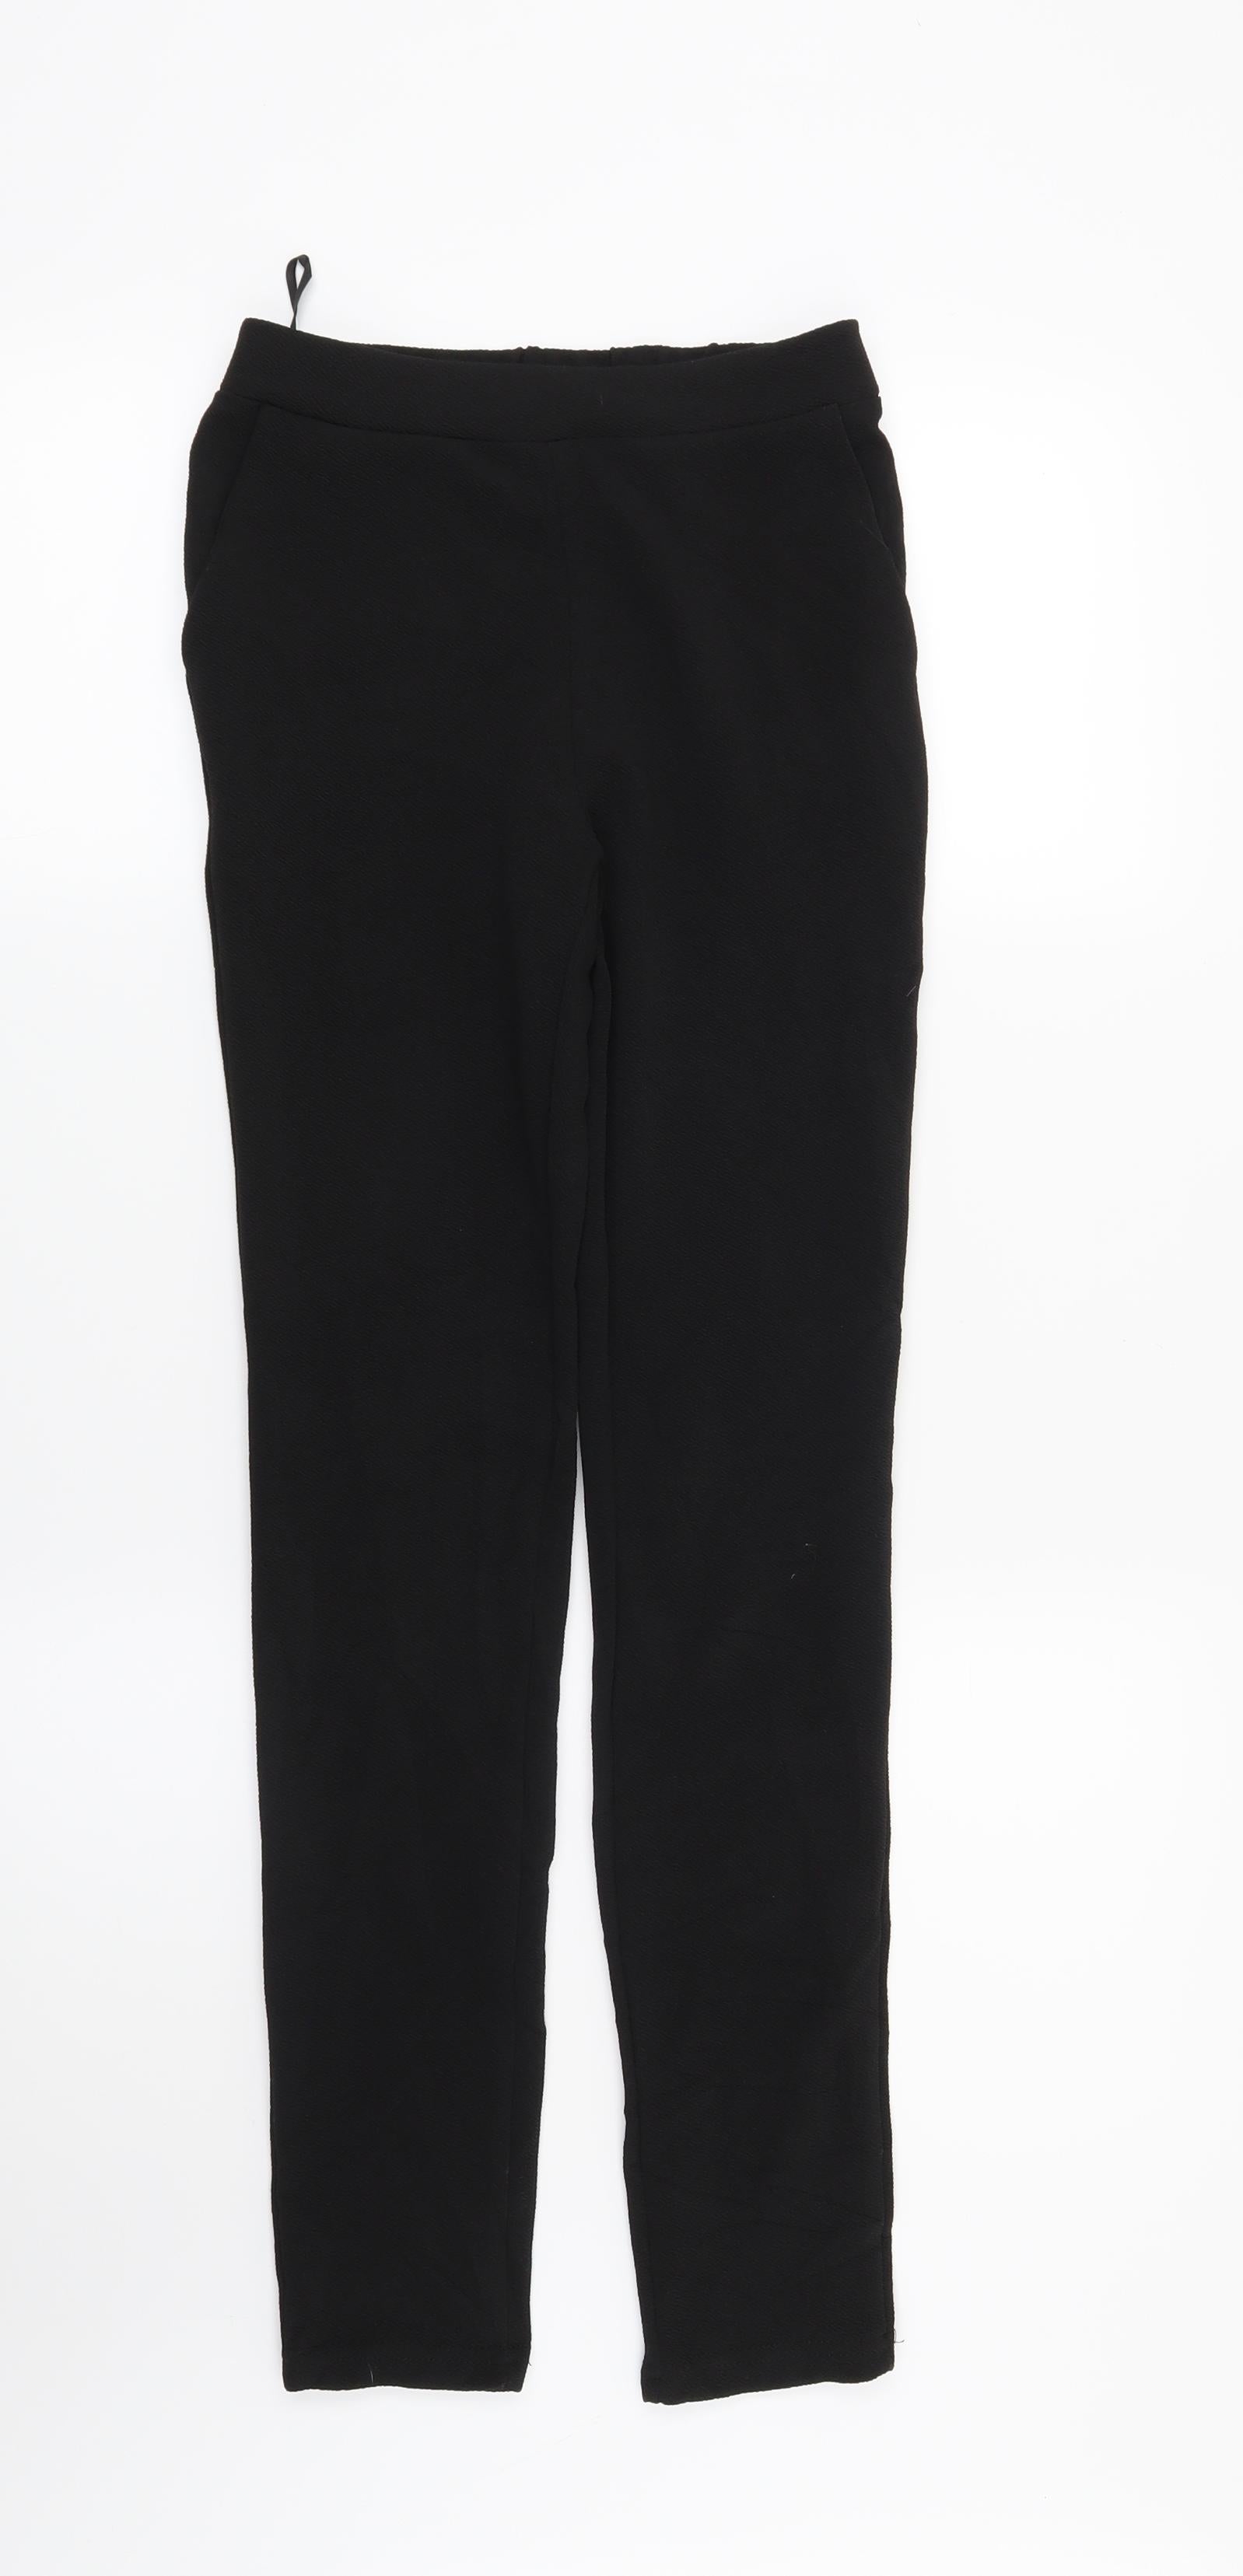 Shein Black High Waist Flare Leg Pants Trousers Womens Fashion Bottoms  Other Bottoms on Carousell